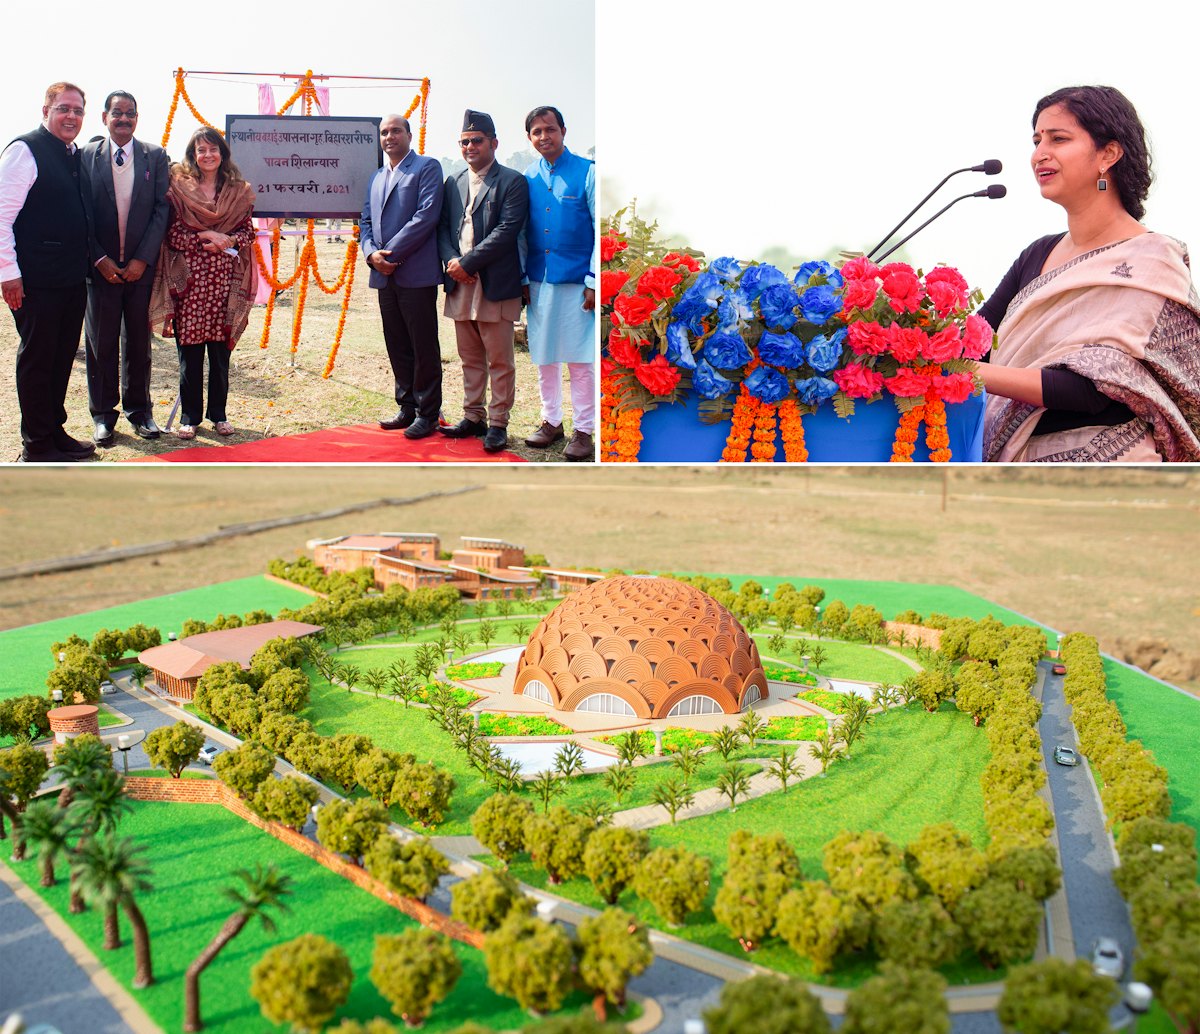 A historic groundbreaking ceremony marked the start of construction for the first local Bahá’í House of Worship in India.